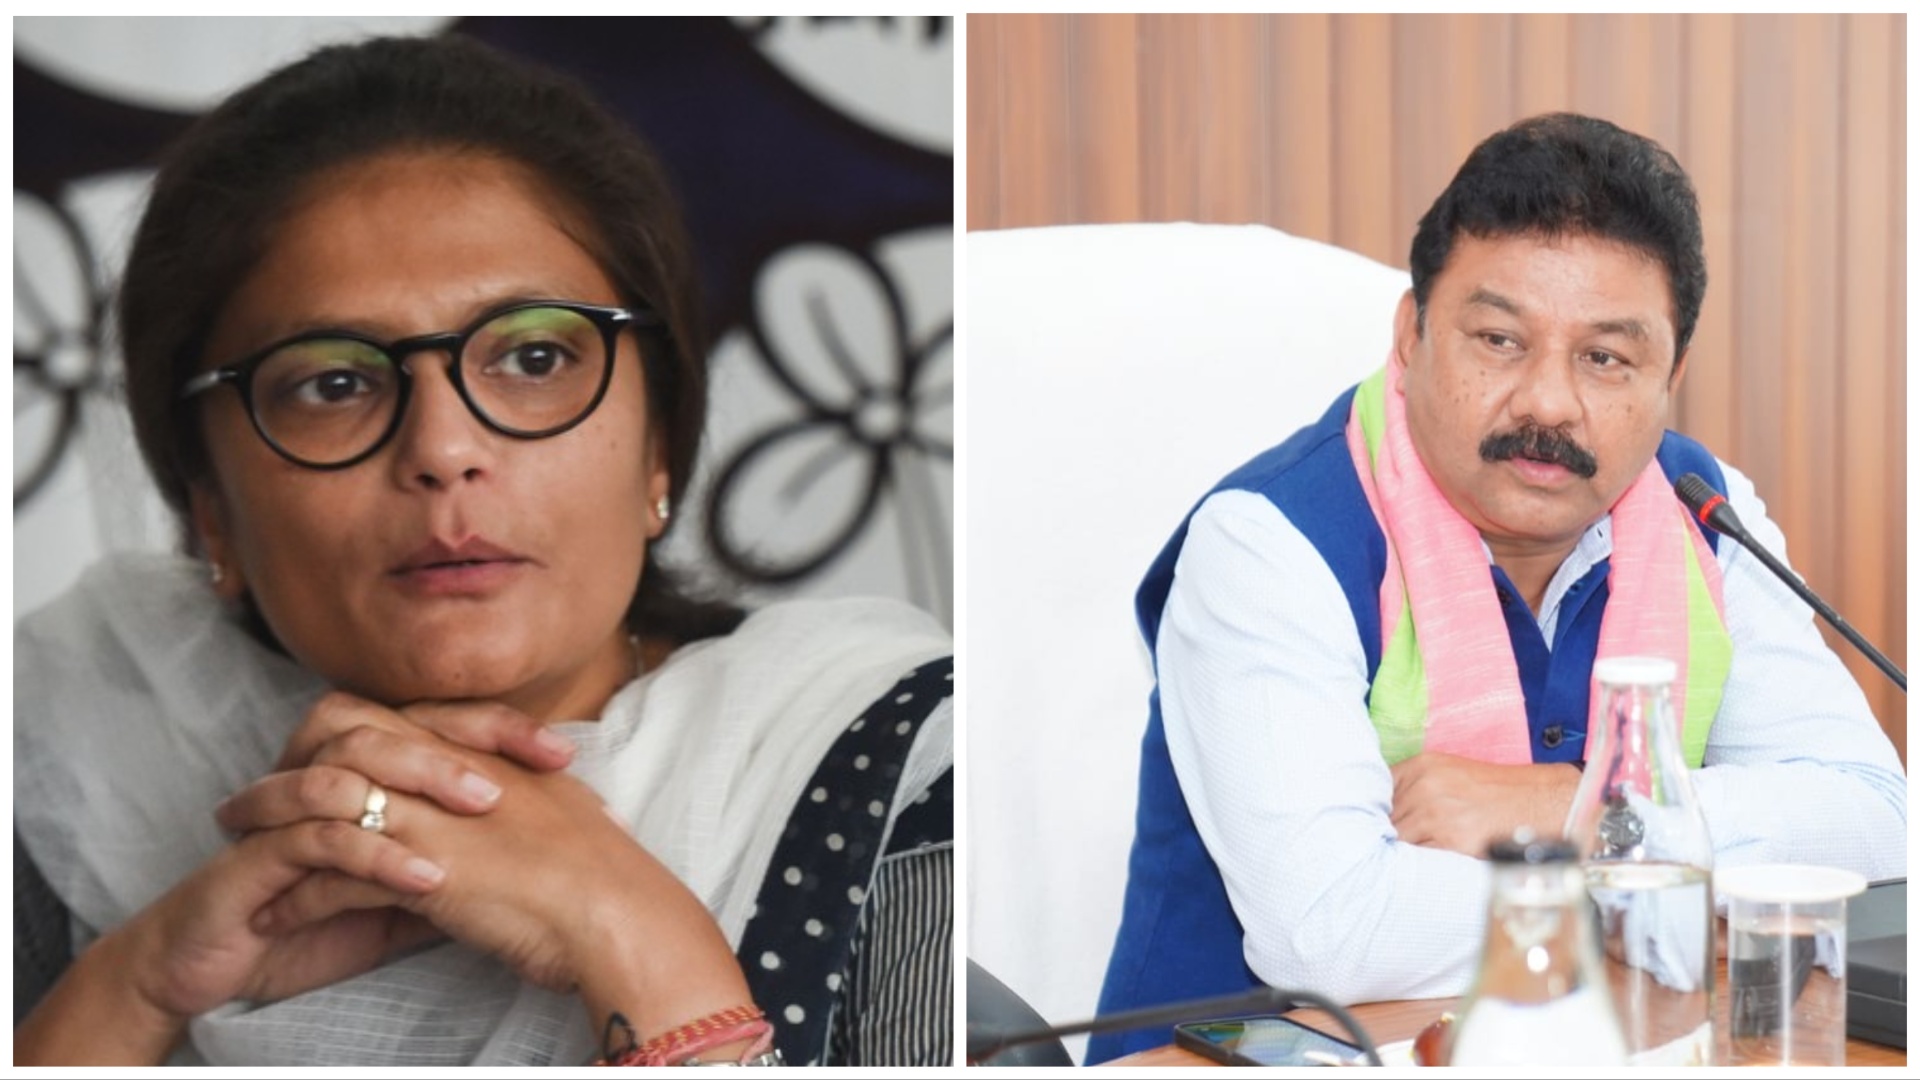 Sushmita Dev and Ranjit Dass on Bengali Banners Being Torn in Assam